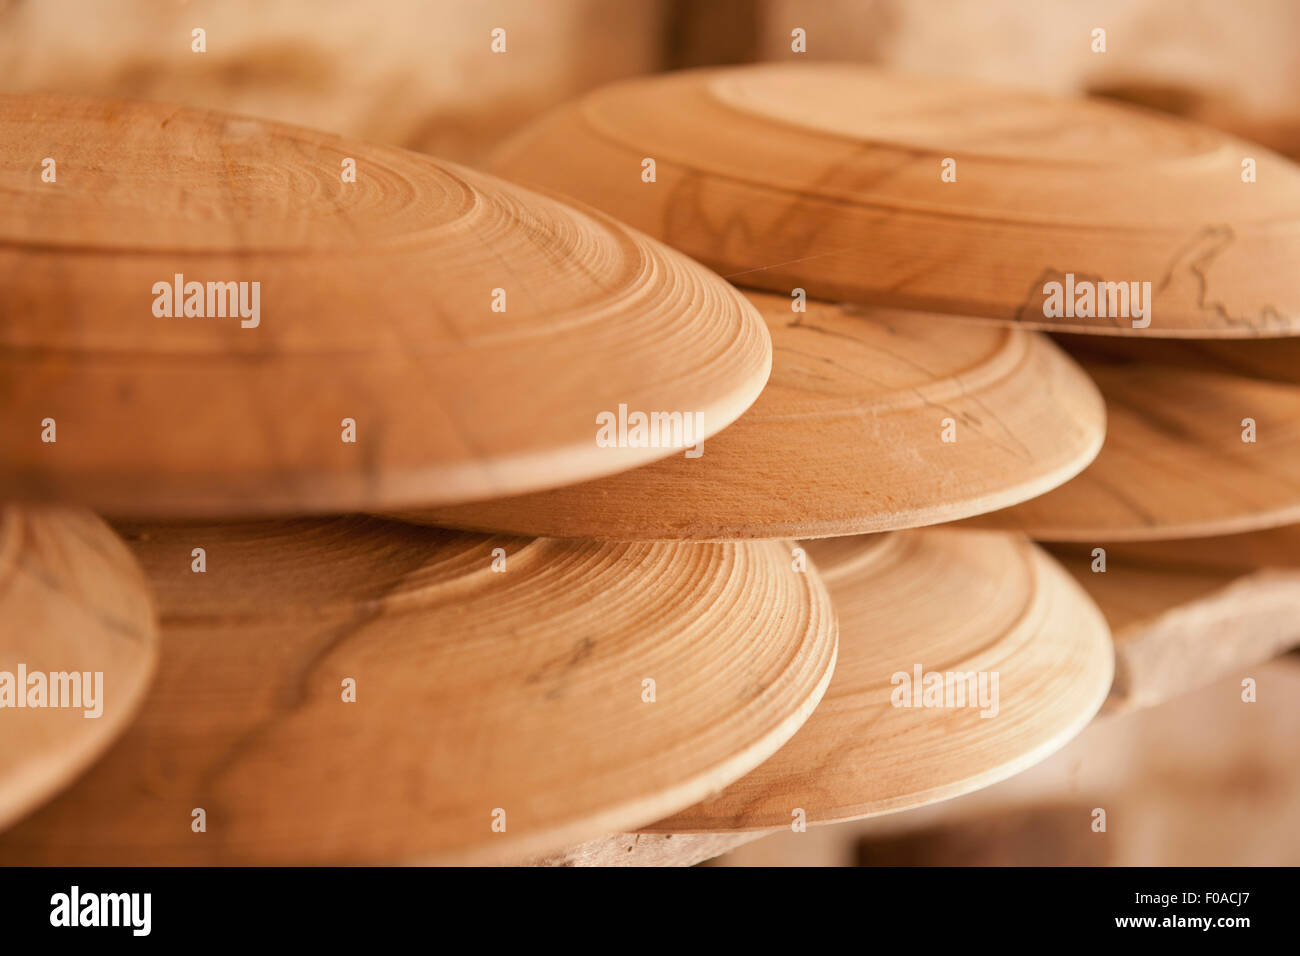 Hand turned wooden plates, close-up Stock Photo